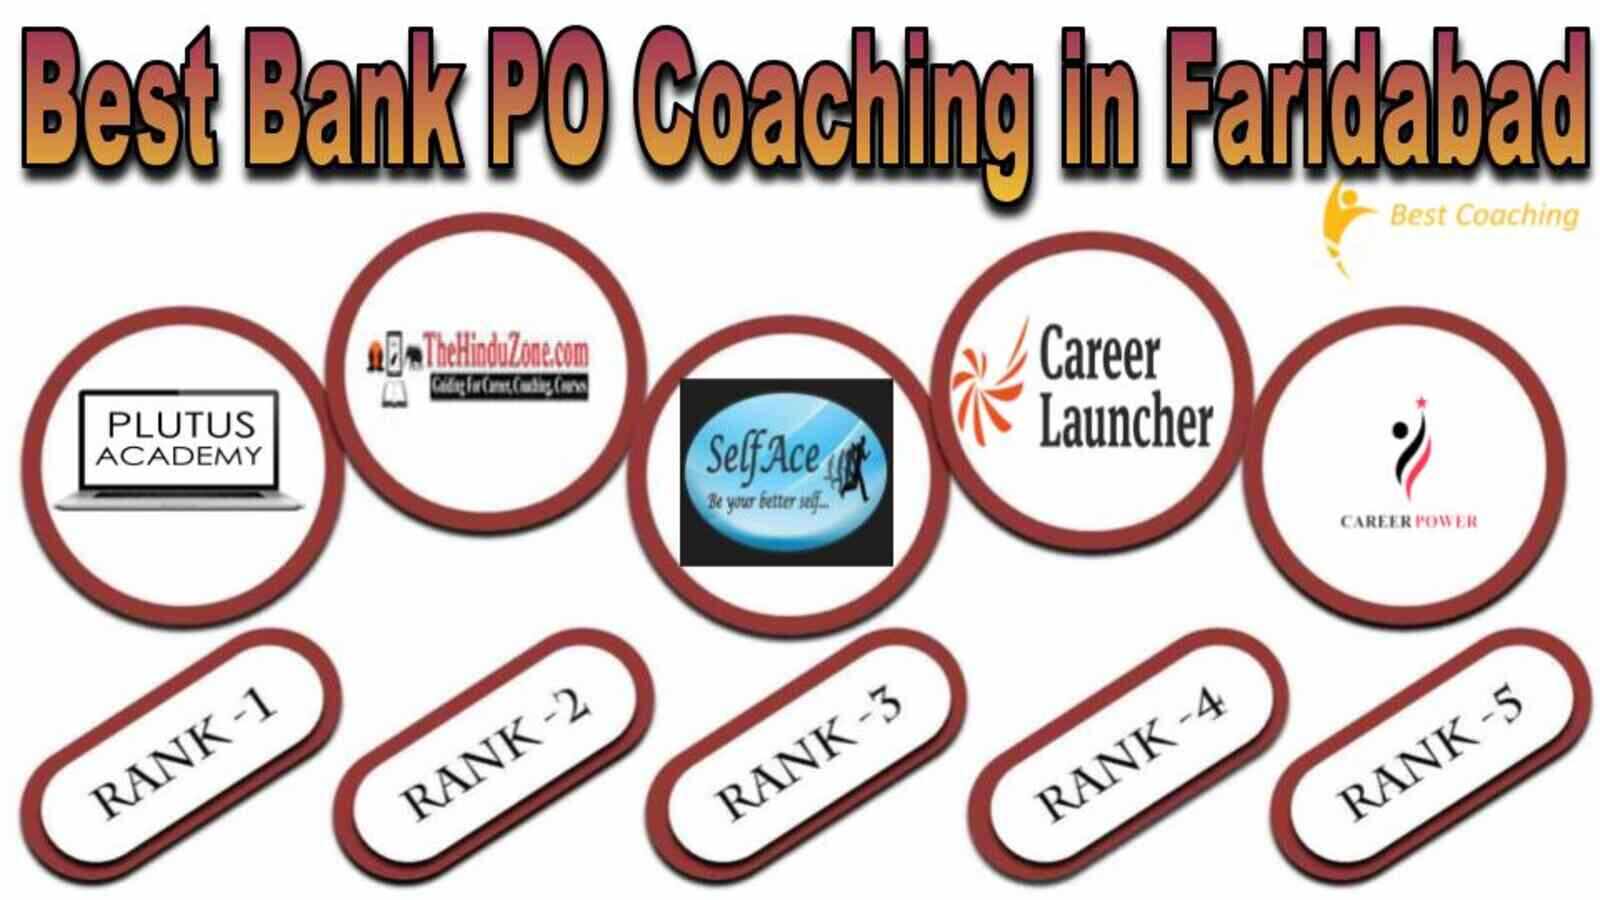 BEST BANK PO COACHING IN FARIDABAD